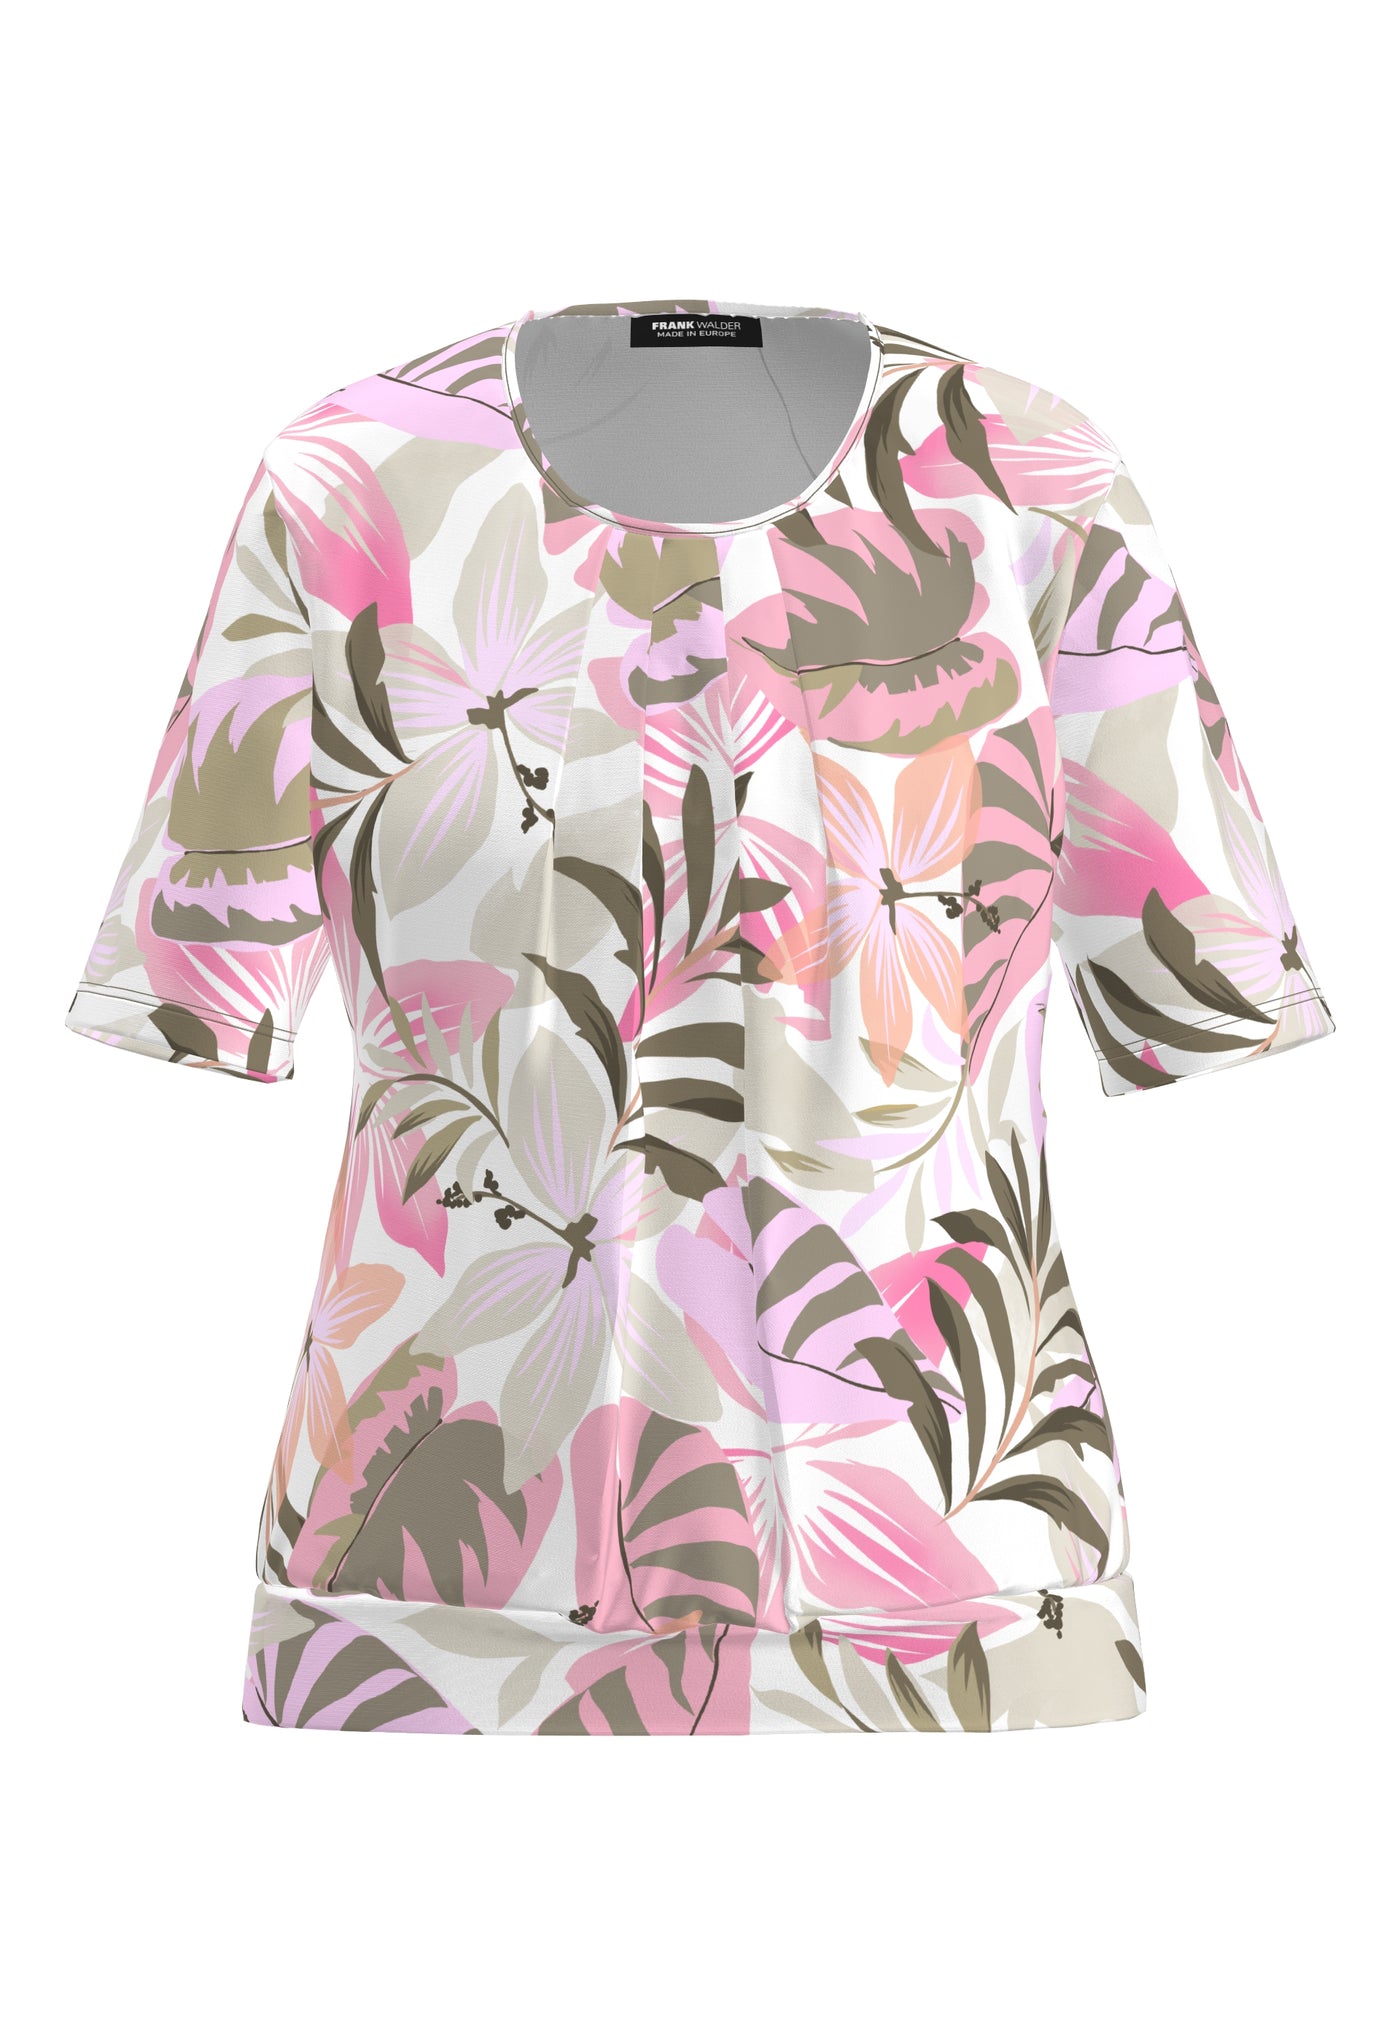 Cream Round Neck Top with Pastel Floral Pattern & Pleated Front